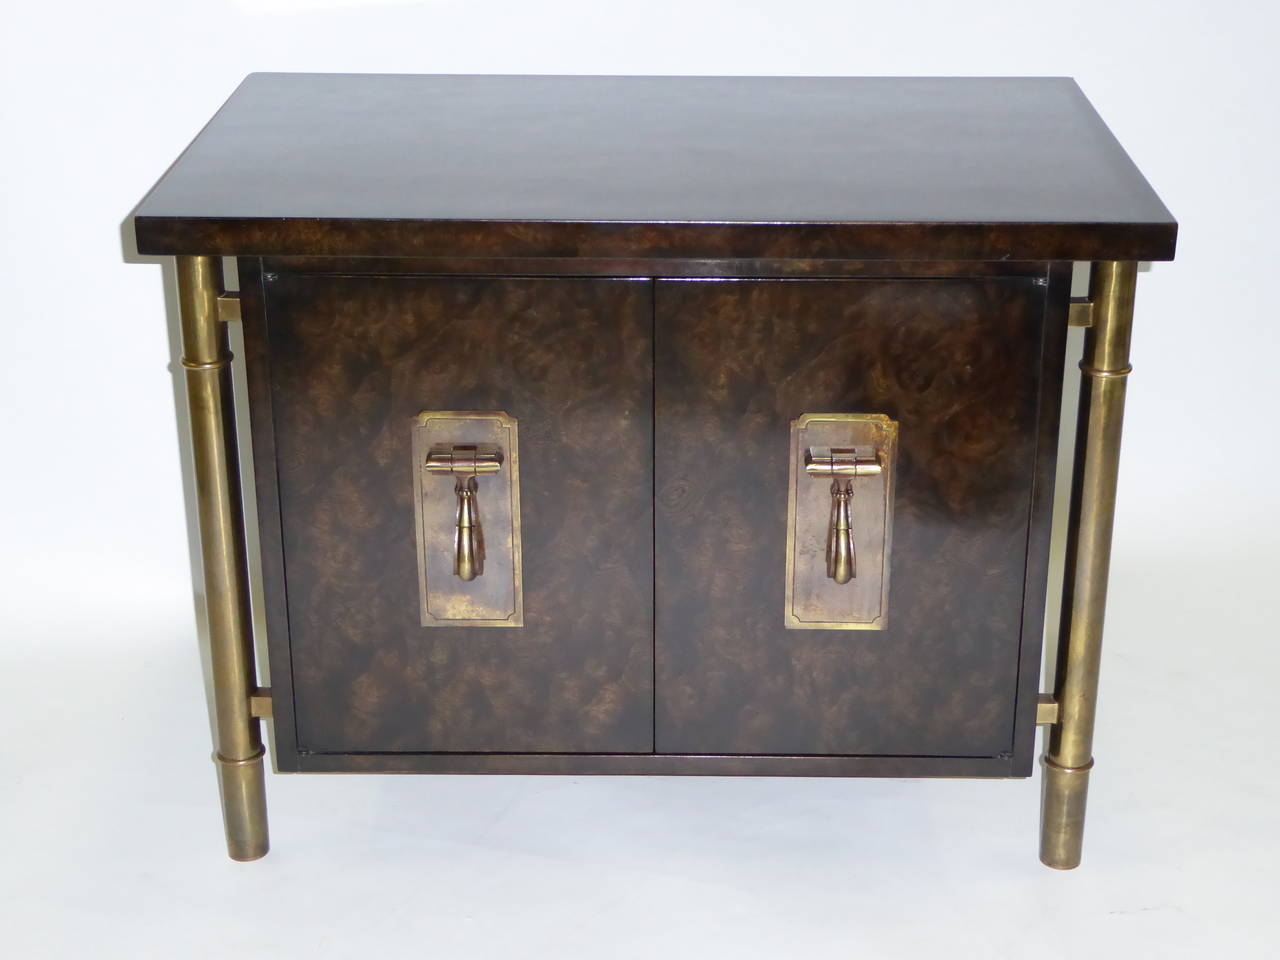 Fine and elegant bedside table by Mastercraft in elm burl with brass legs and pulls. Designed by William Doezema, co-founder of Mastercraft. Doors open to open cabinet with adjustable shelf. As a night table, end table. Exquisite!

Measurements:
32